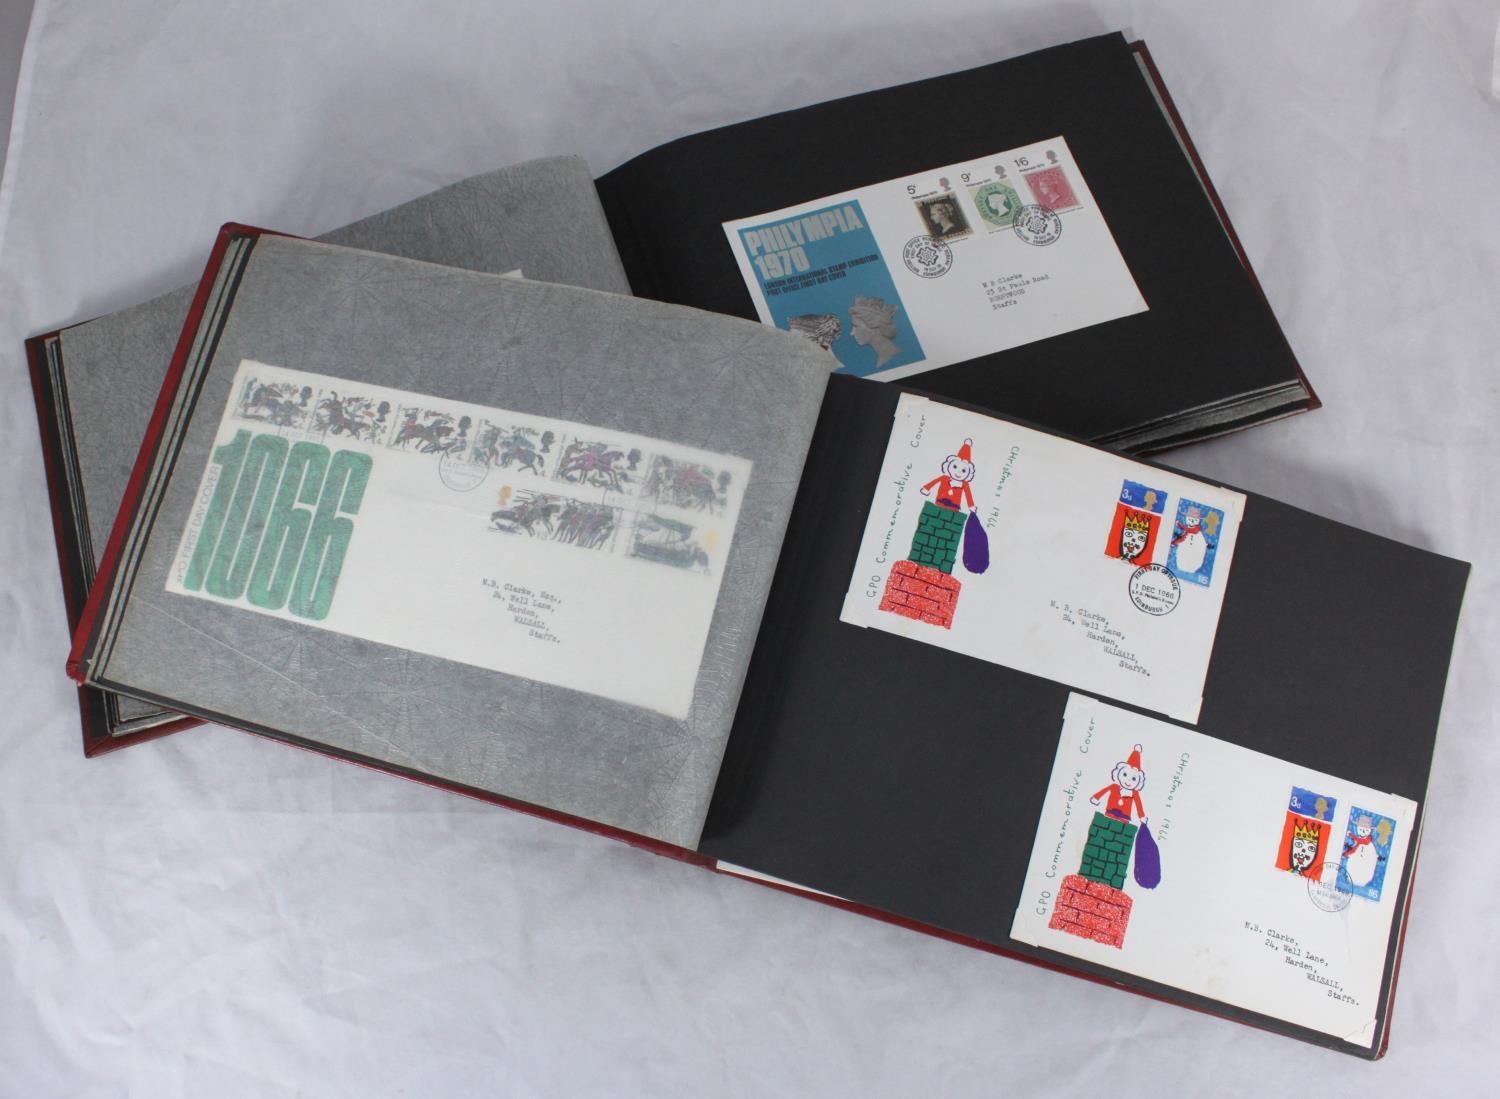 A collection of approximately 130 first day covers across two binders